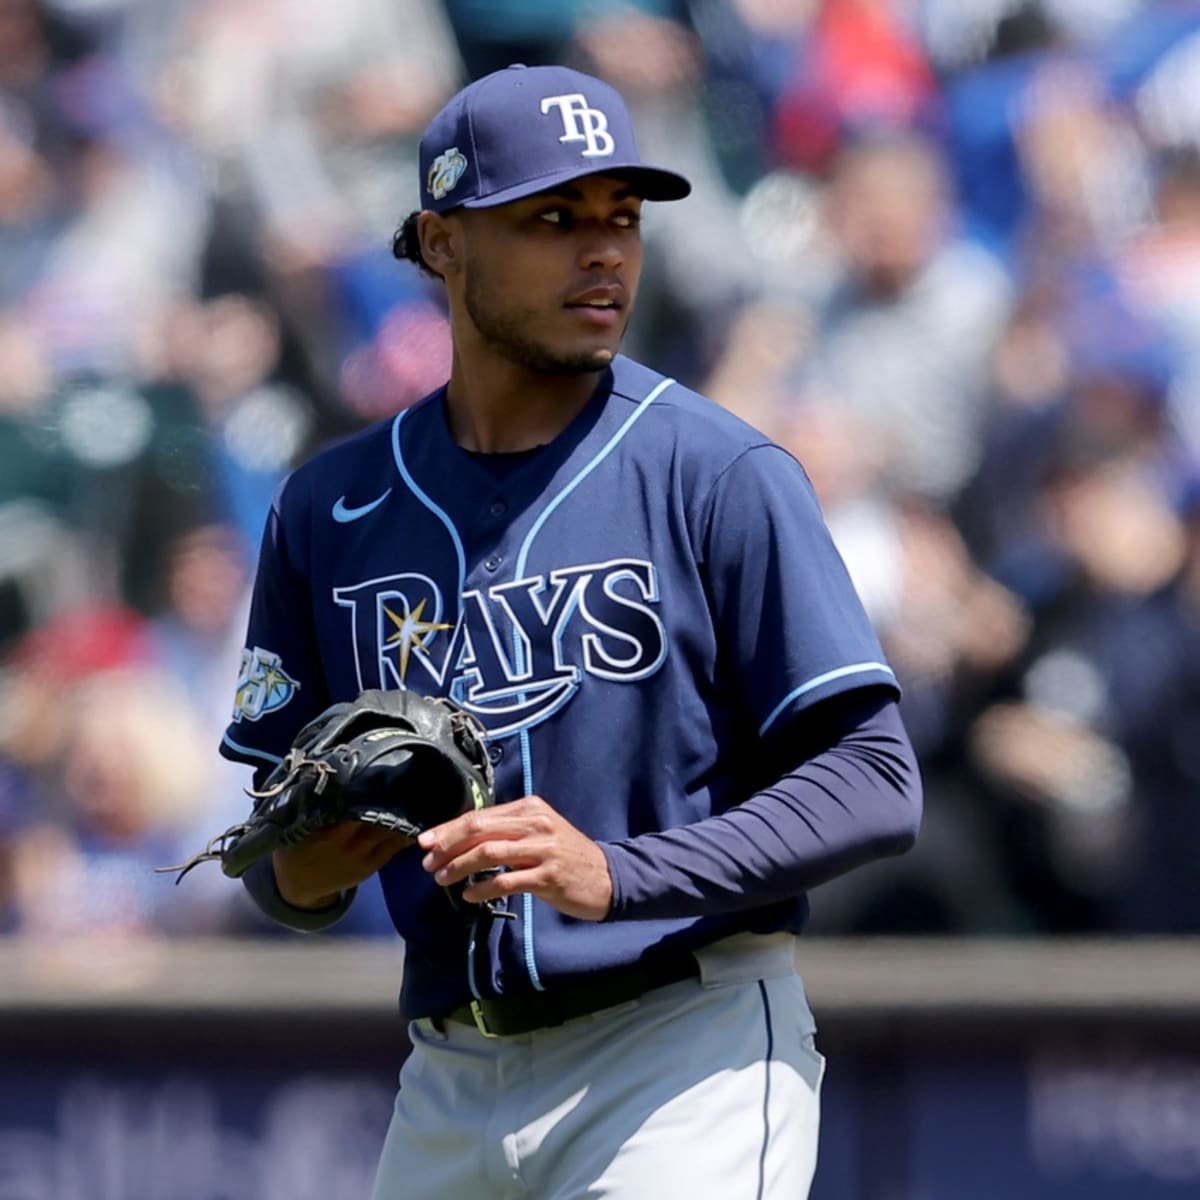 GameDay Preview (Saturday): For Tampa Bay Rays Starter Taj Bradley, Music  And Movies Keep Him Locked Into Routine - Fastball